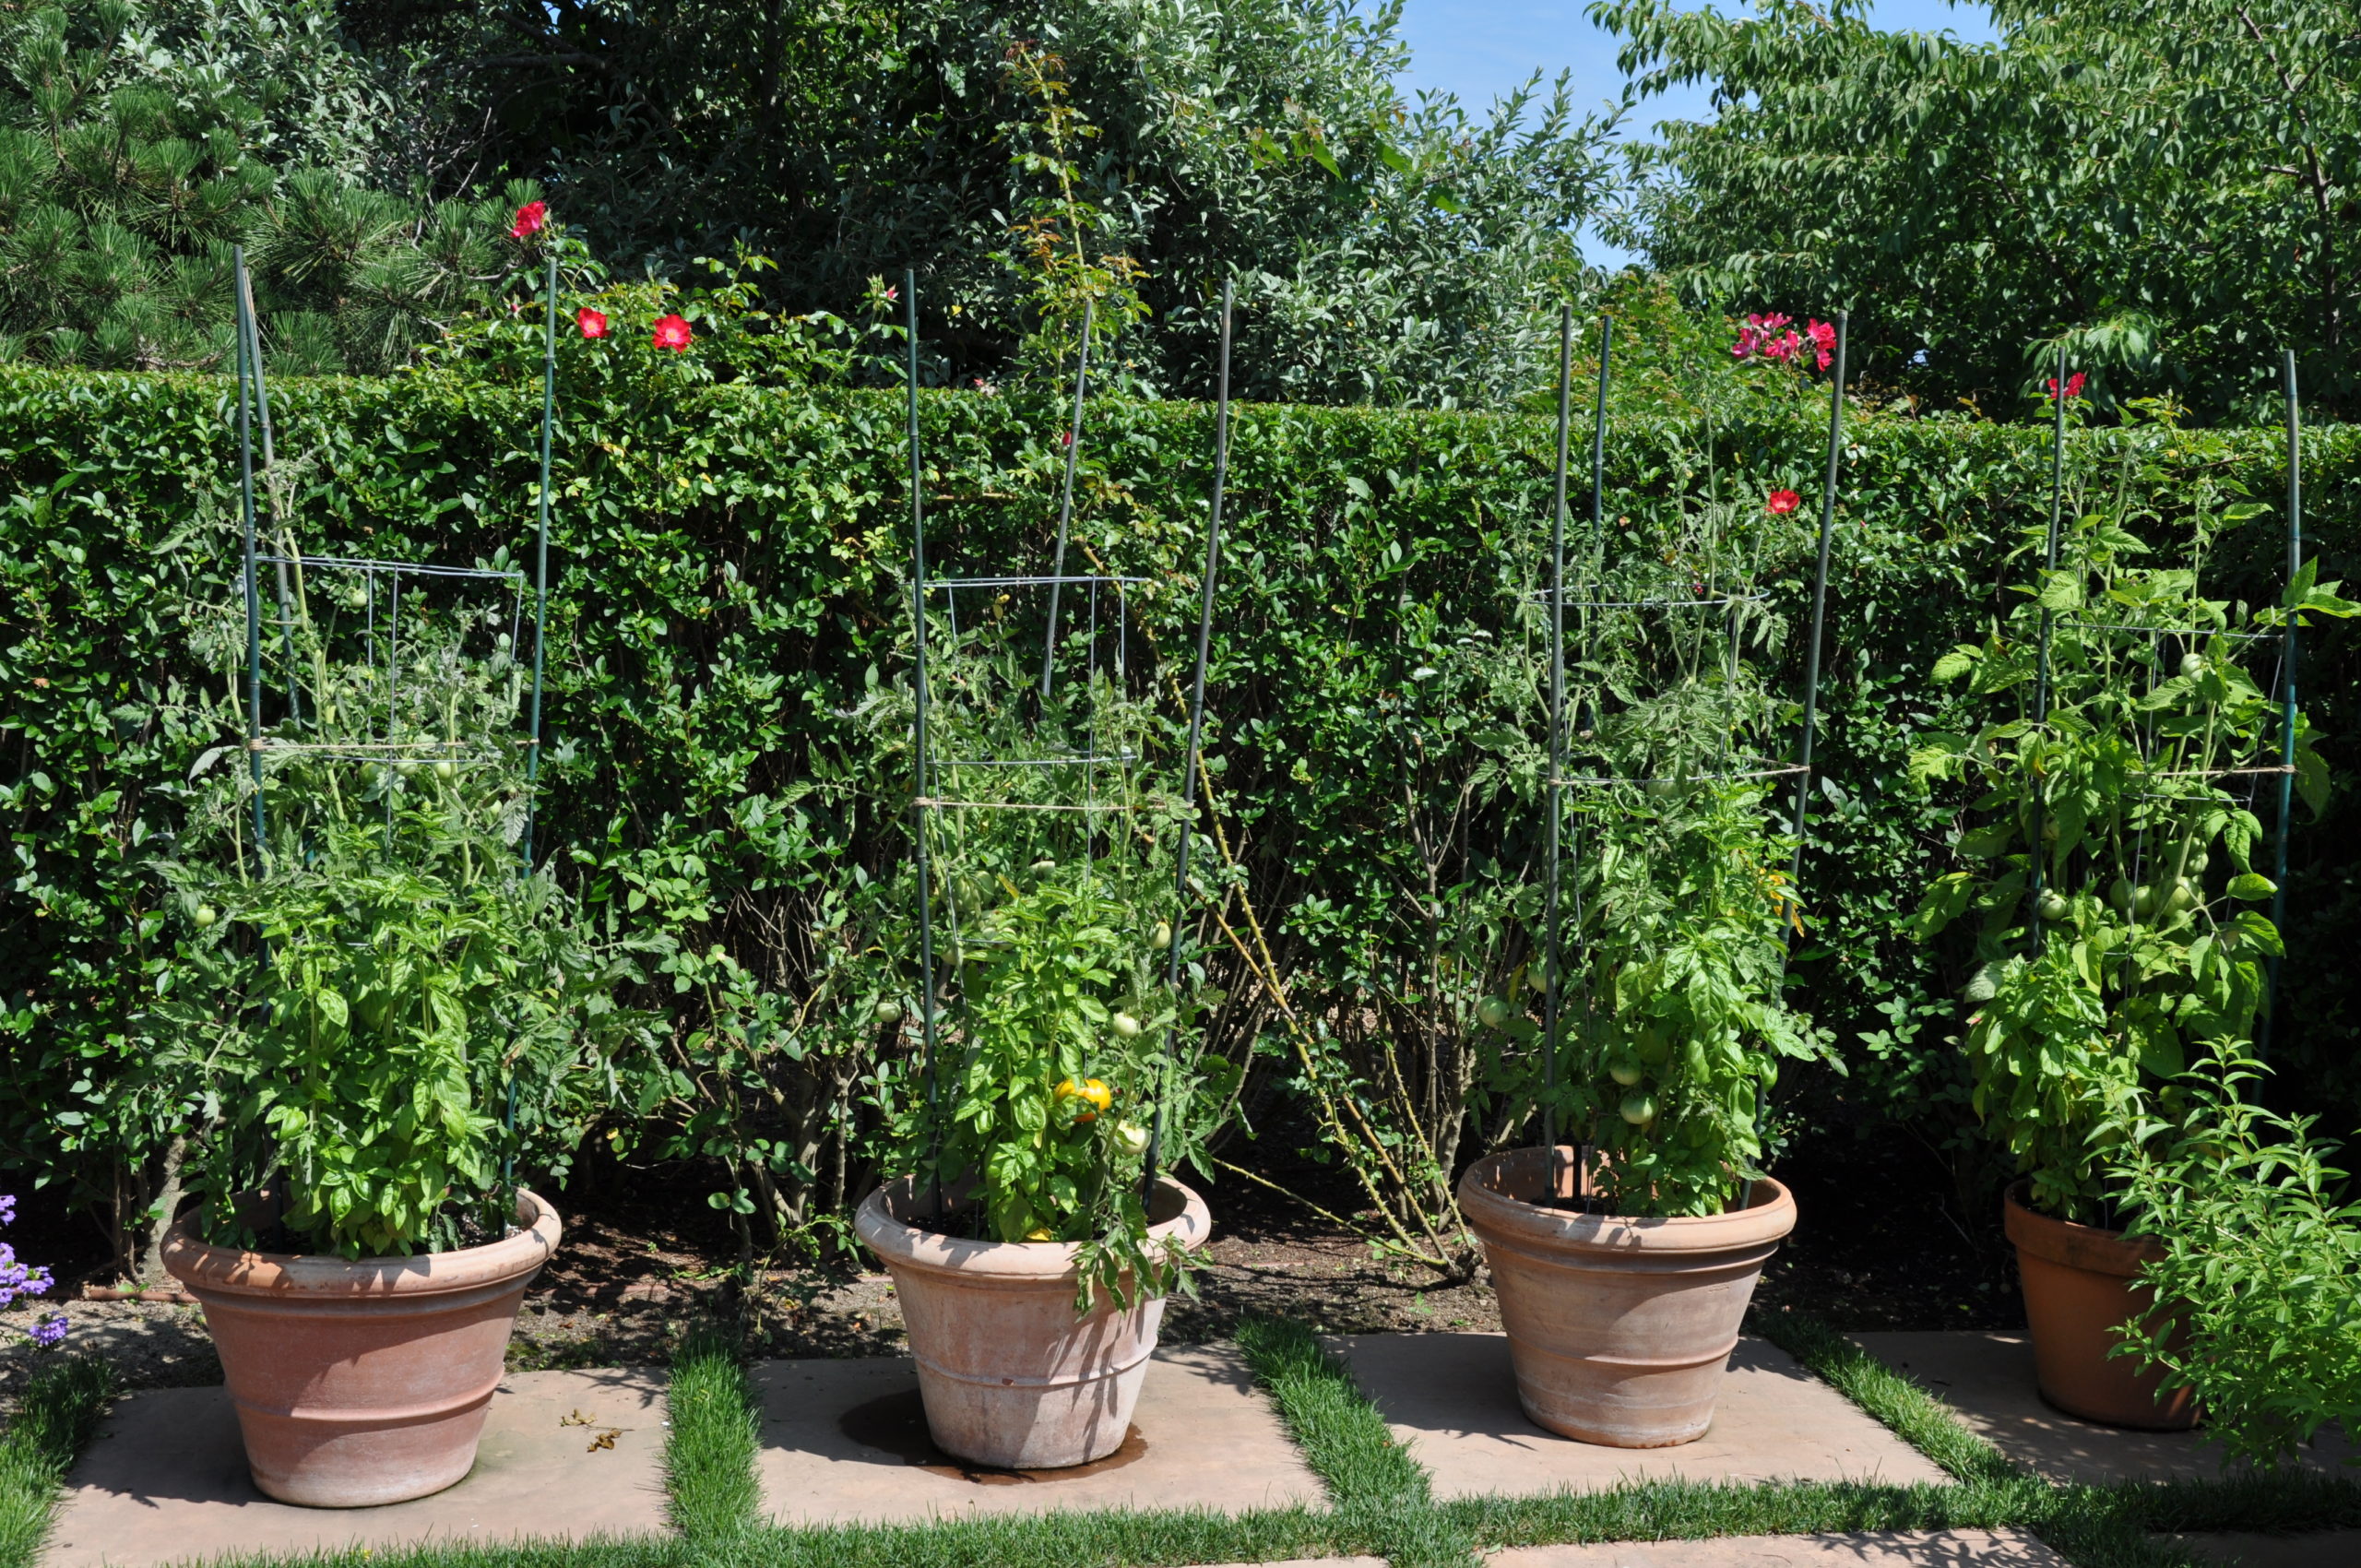 Determinate tomatoes being grown in pots in a hedged Southampton garden. These are just transitioning from green mature to ripe (second from the left on bottom) and most will be ready for harvest in a short 10-day window as happens with the determinate types.